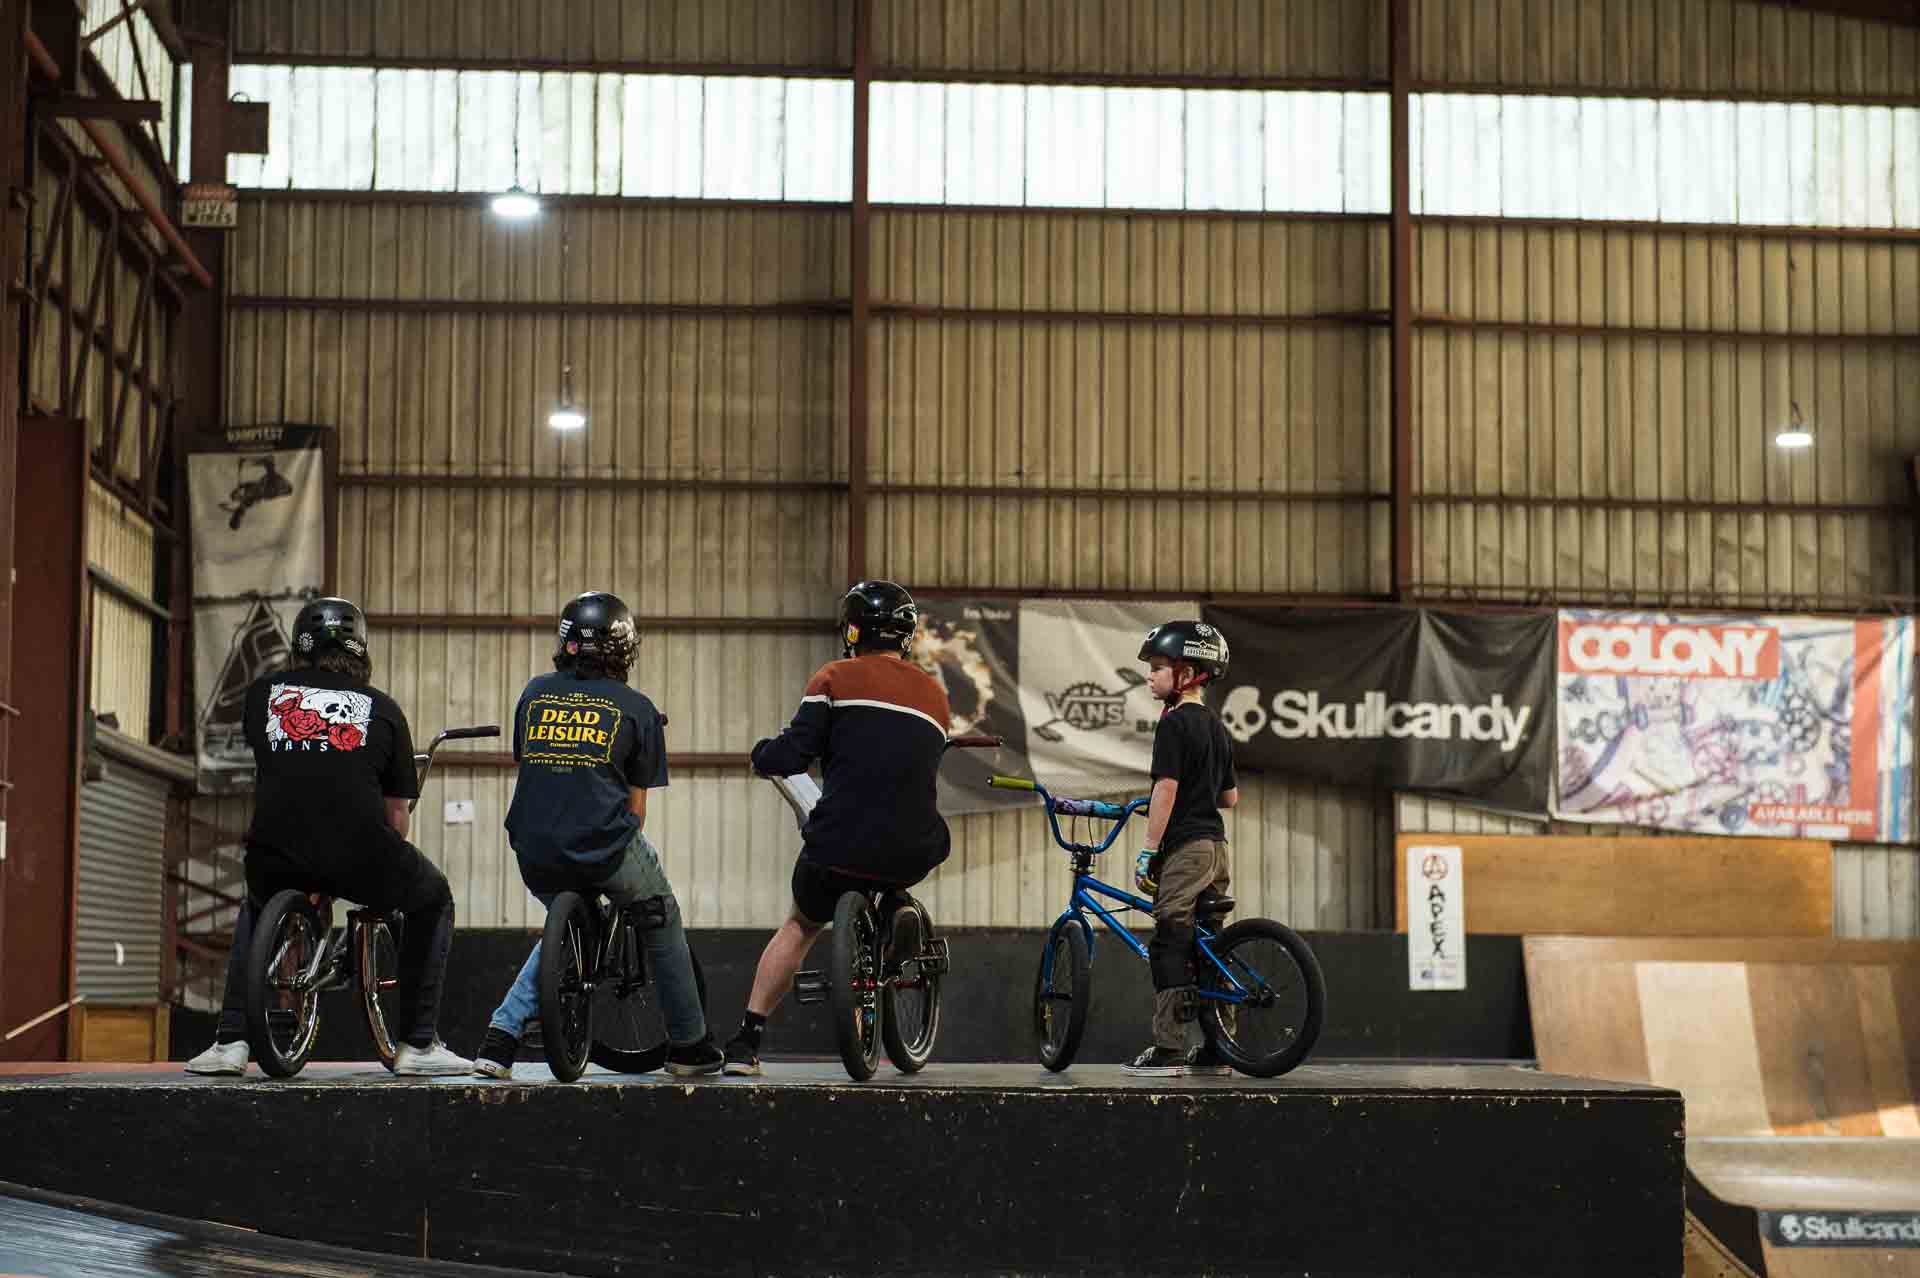 Riders ready to drop in at RampFest Indoor Skate Park, Melbourne Australia